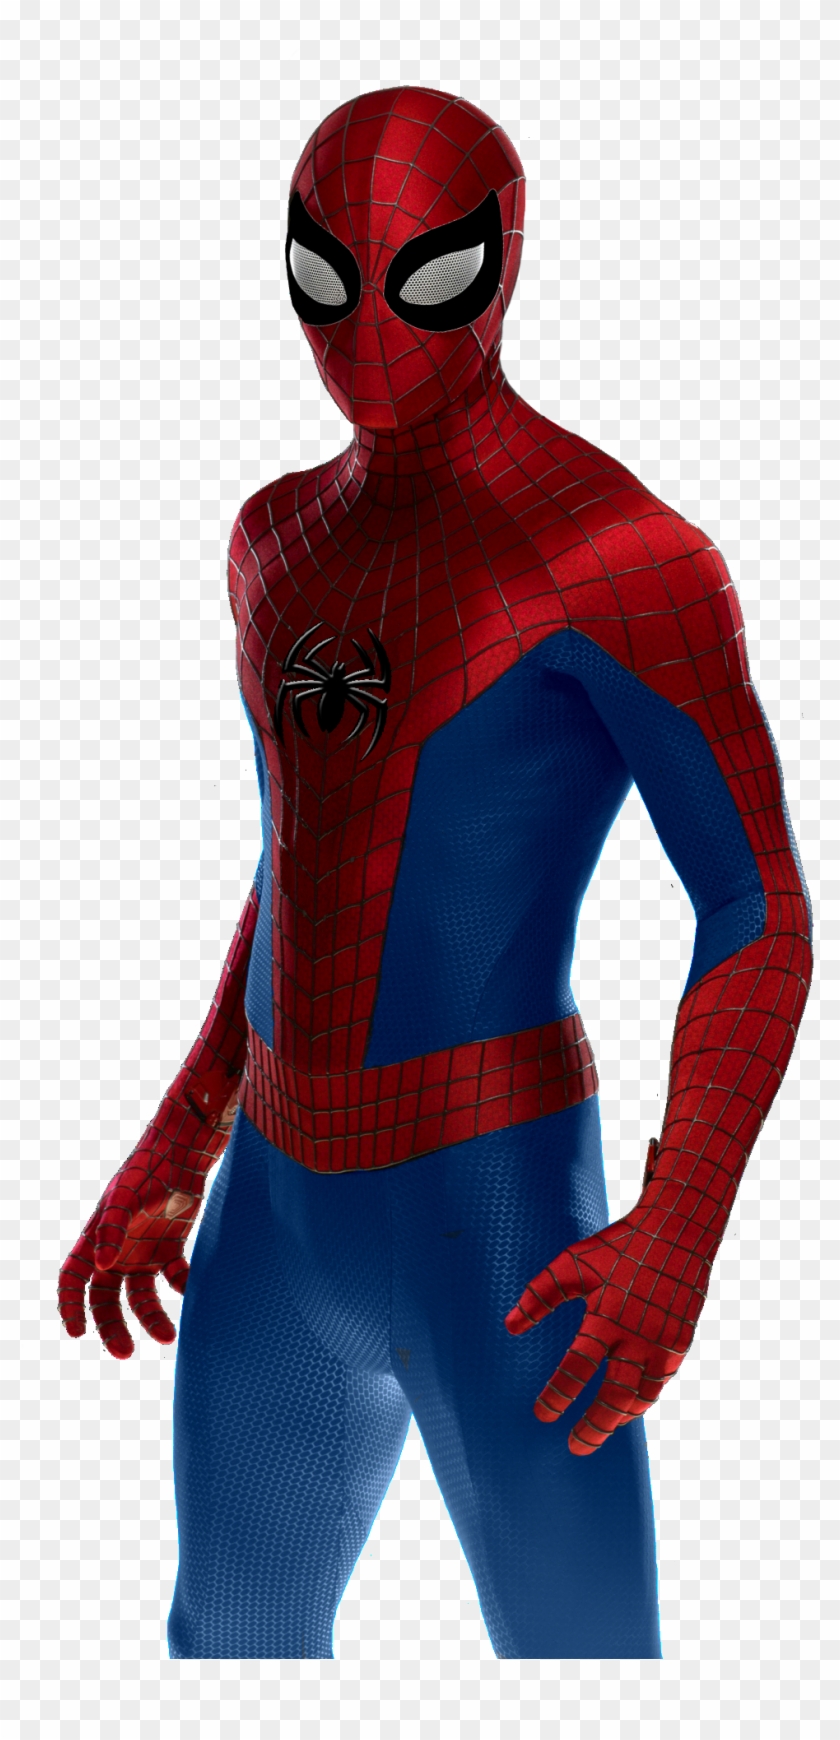 Amazing Spider Man Png, Transparent Png - 1536x2048(#64528) - PngFind